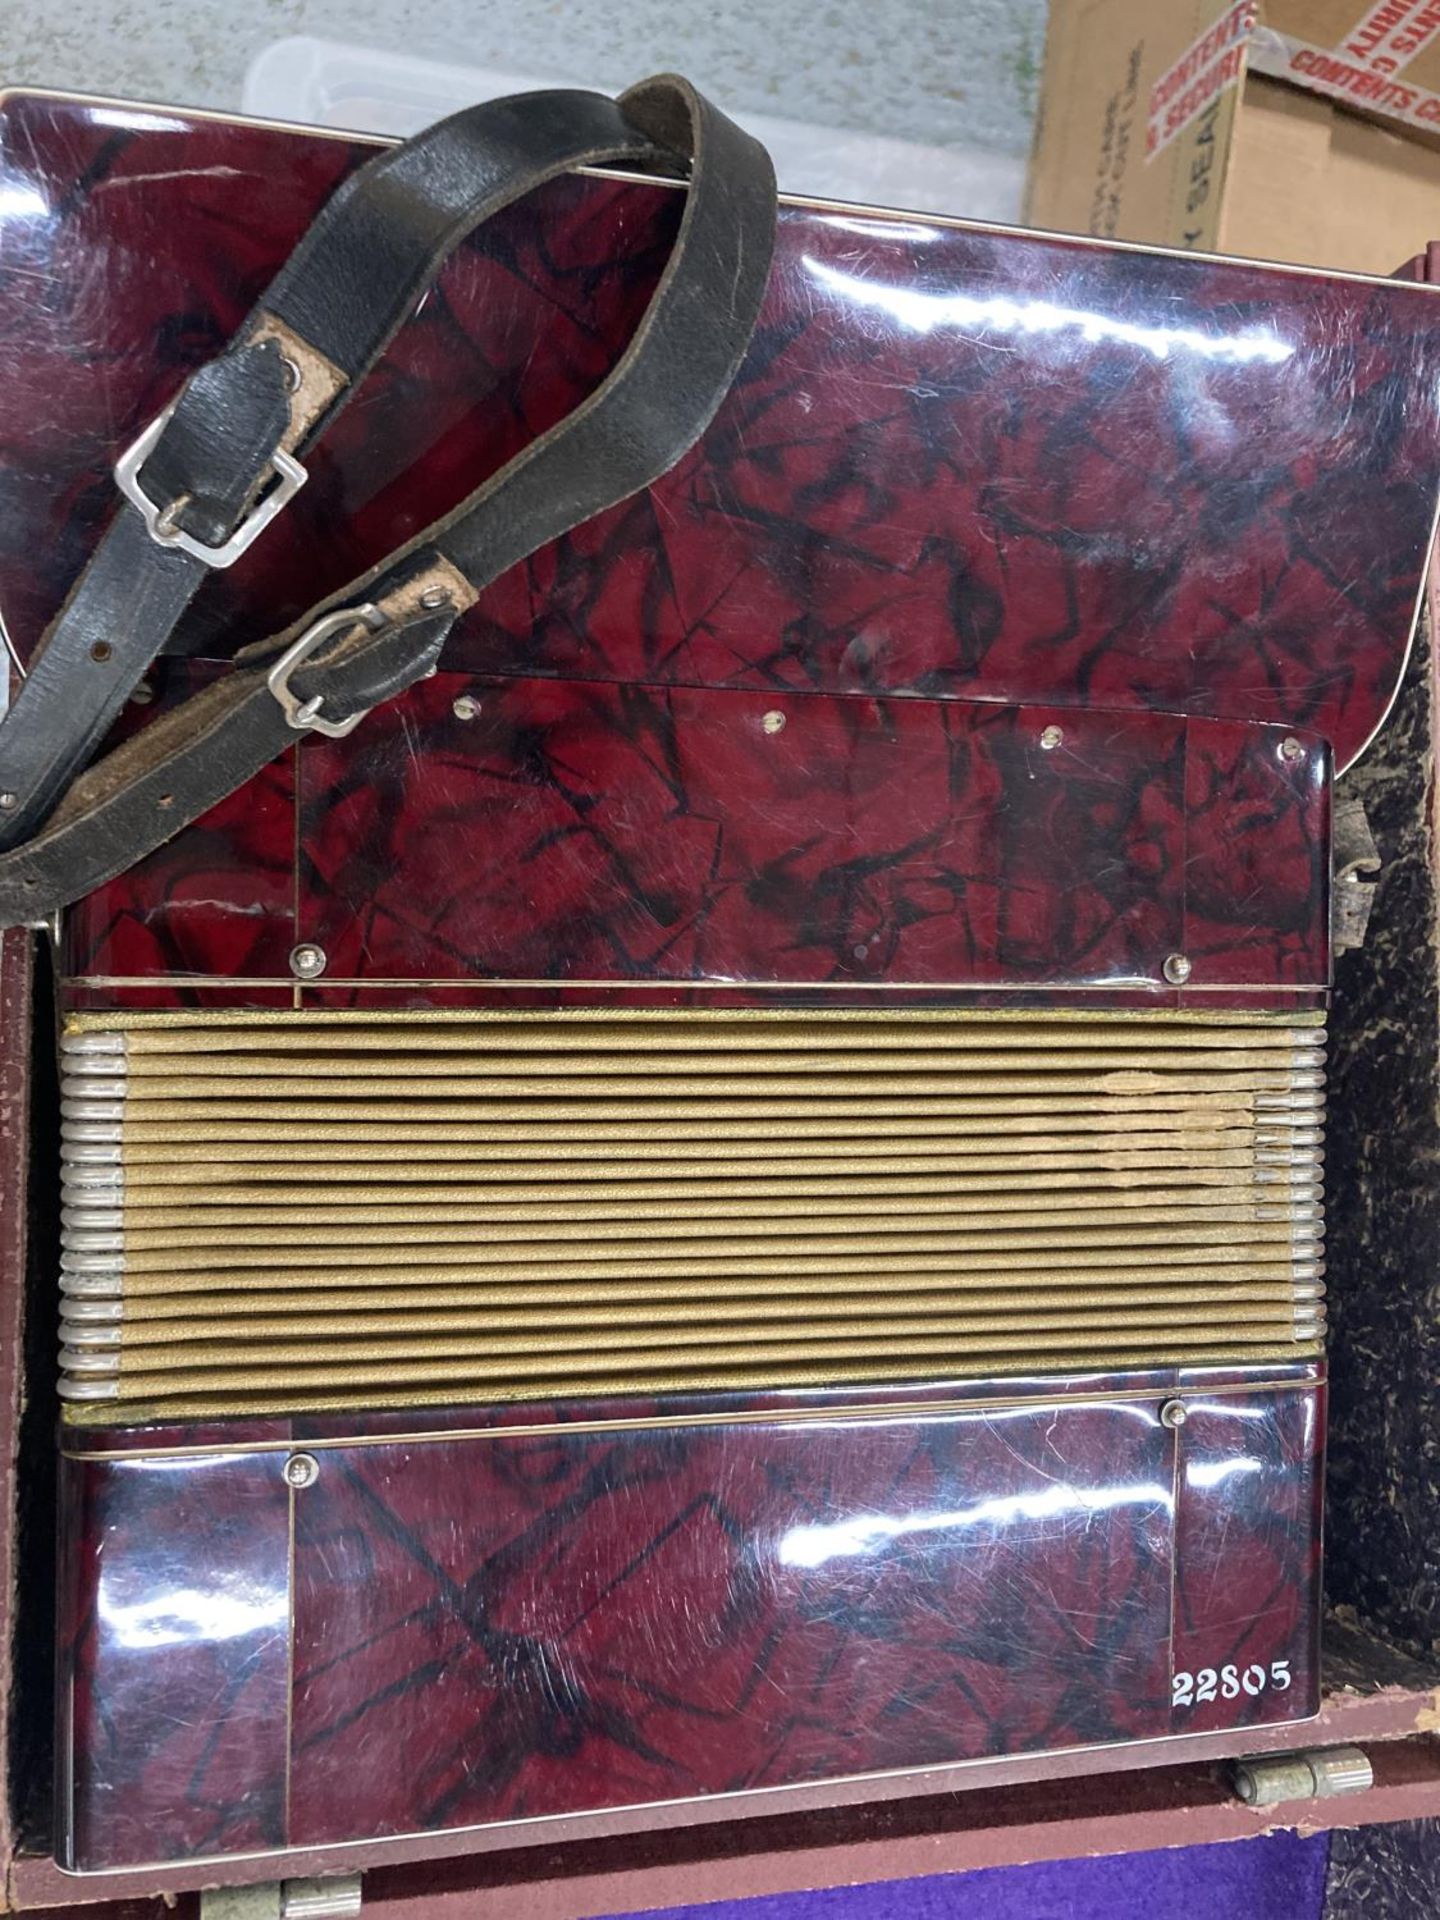 A VINTAGE ROYAL STANDARD ACCORDIAN WITH RED BAKELITE BODY IN THE ORIGINAL CASE - Image 4 of 4